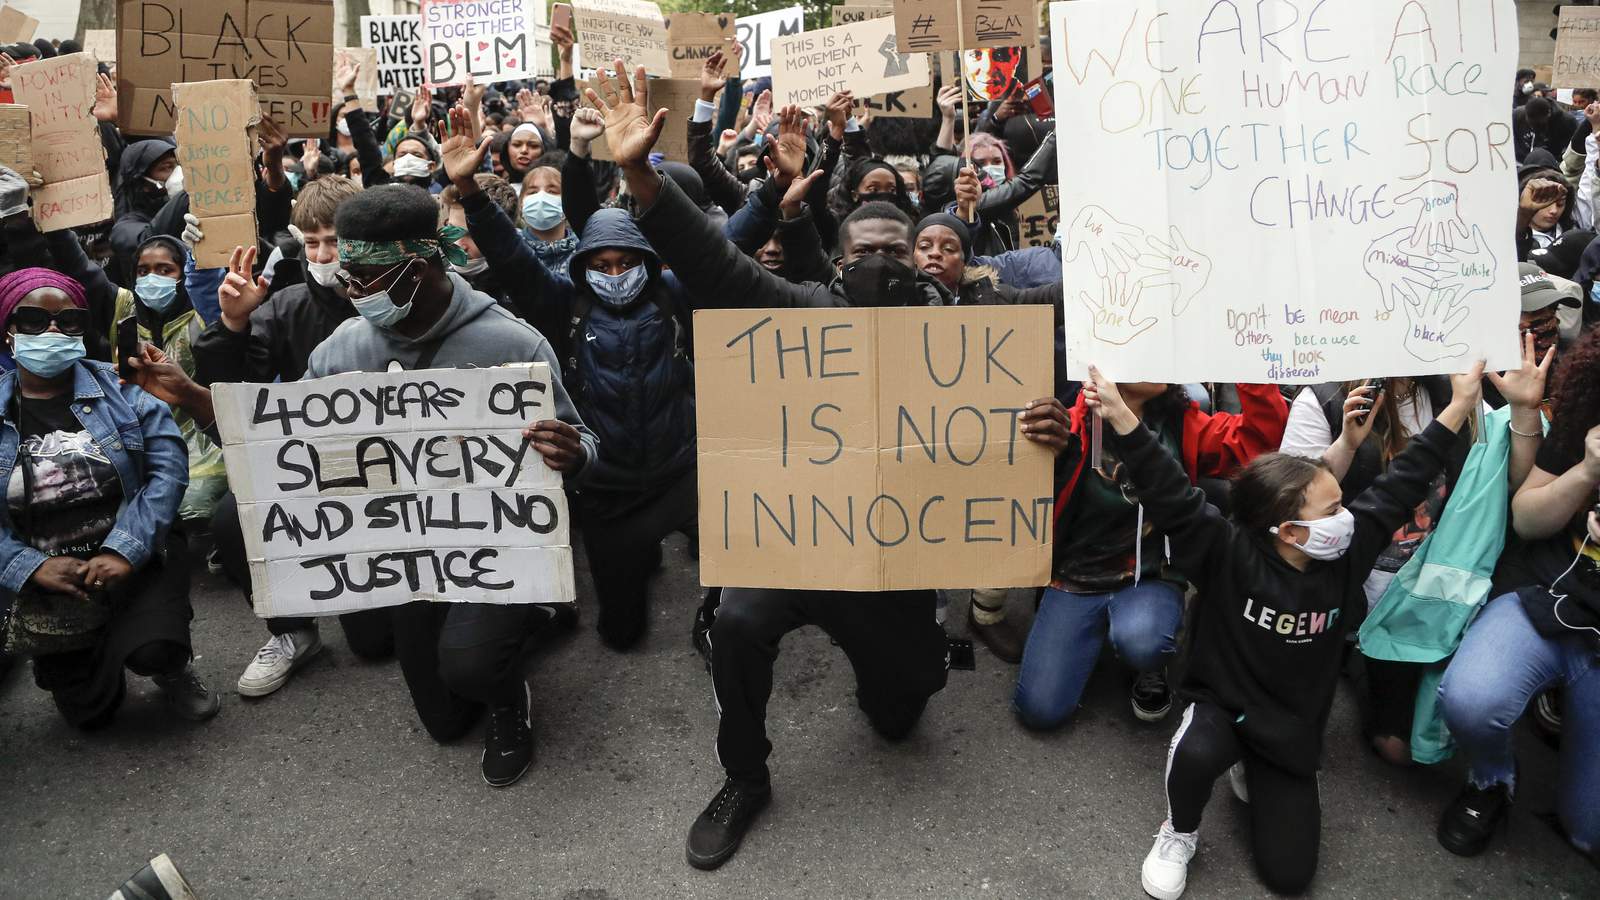 Authors of UK racism report hit back at 'misrepresentation'